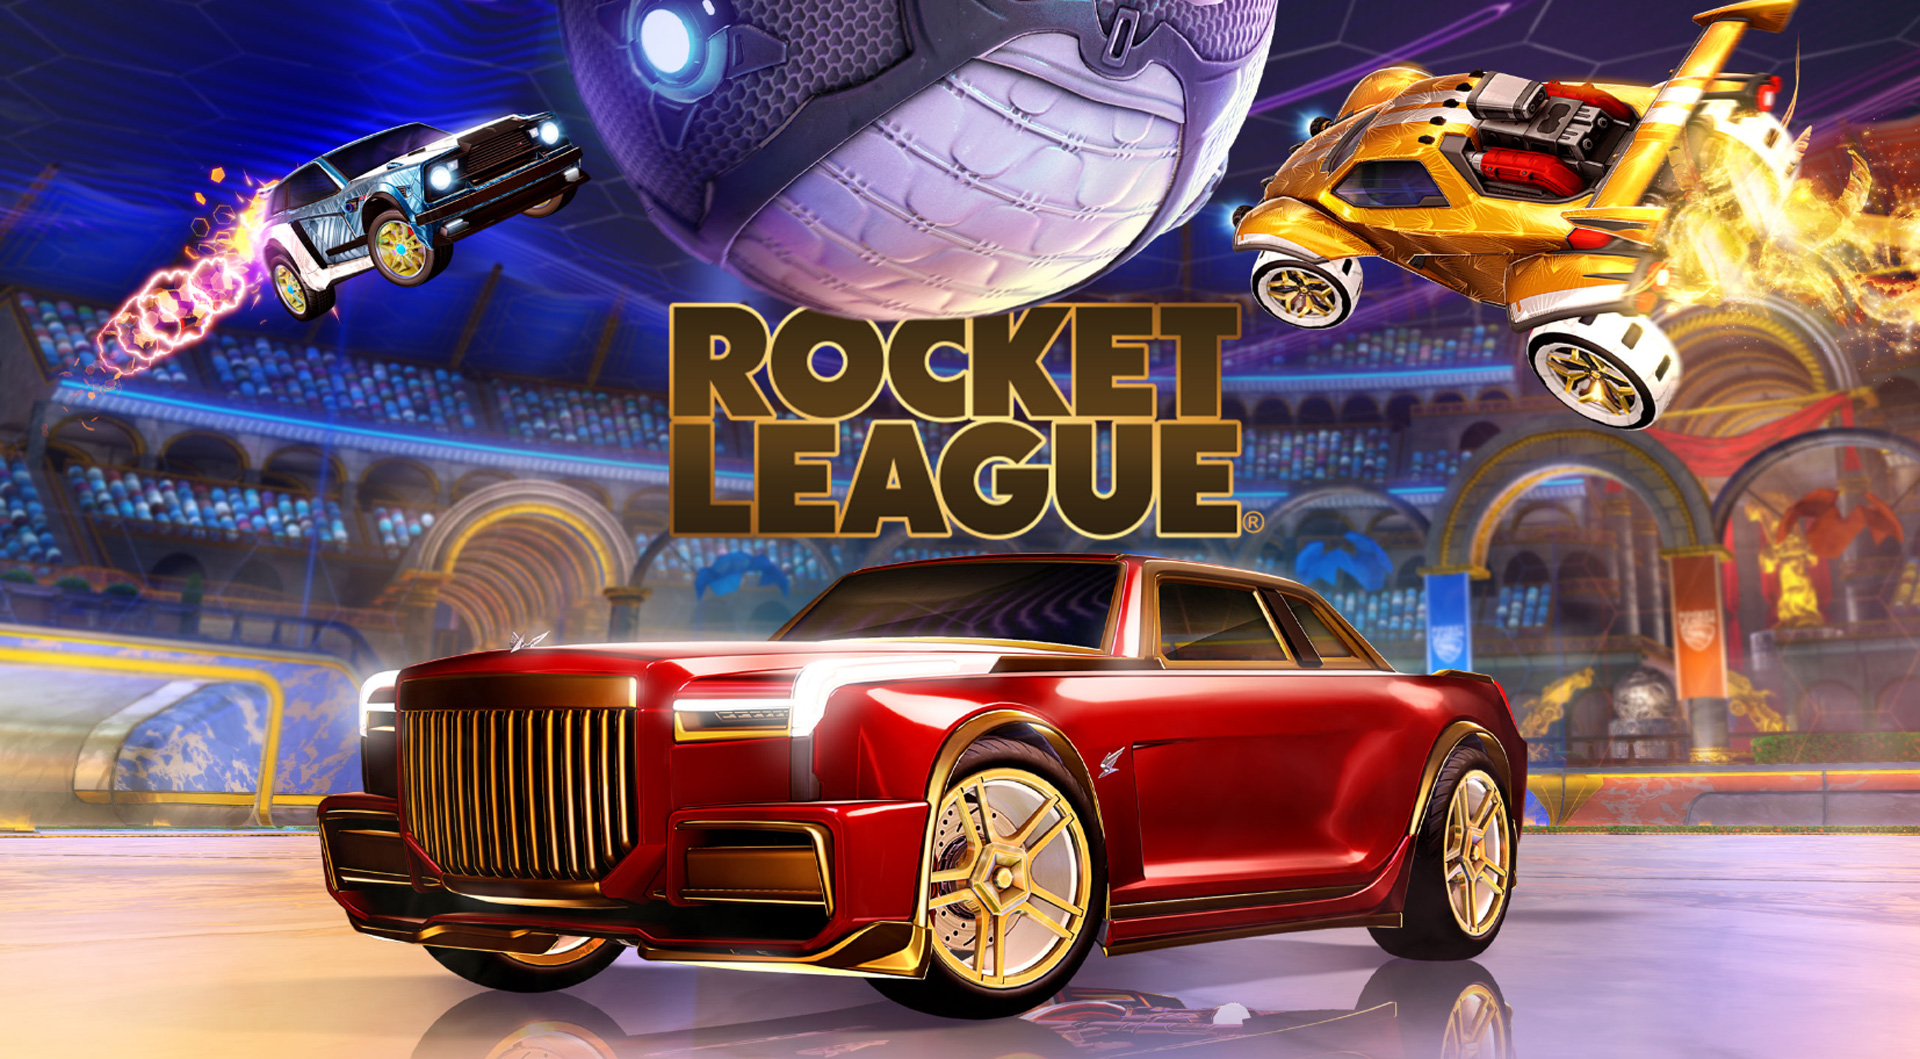 Rocket League feature temporarily disabled: How to fix it?